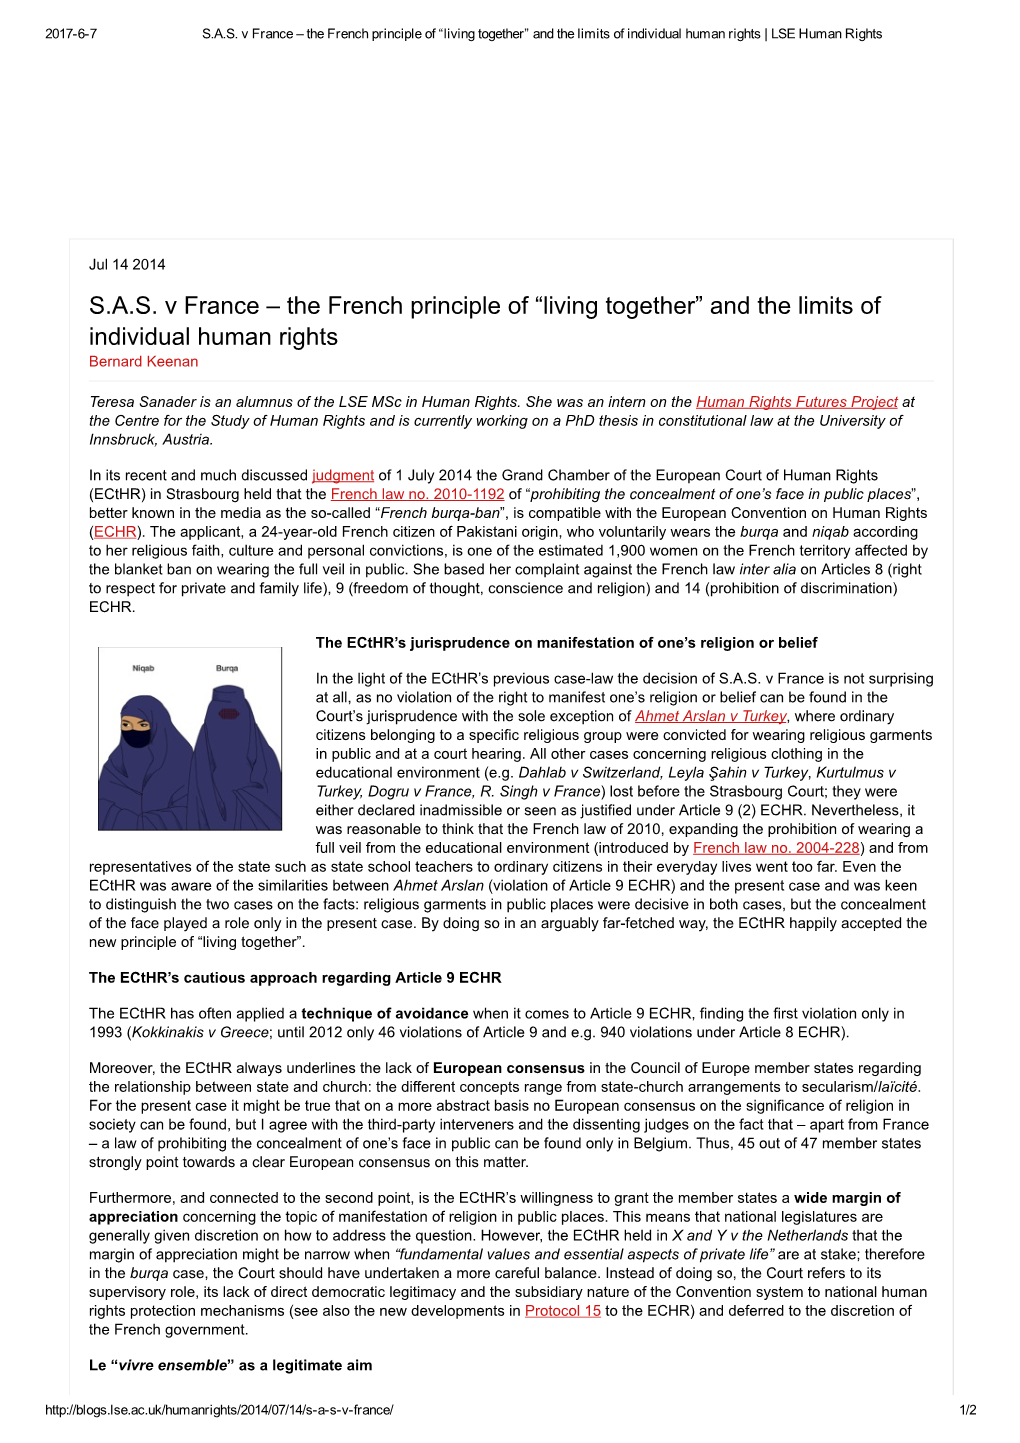 S.A.S. V France – the French Principle of “Living Together” and the Limits of Individual Human Rights | LSE Human Rights